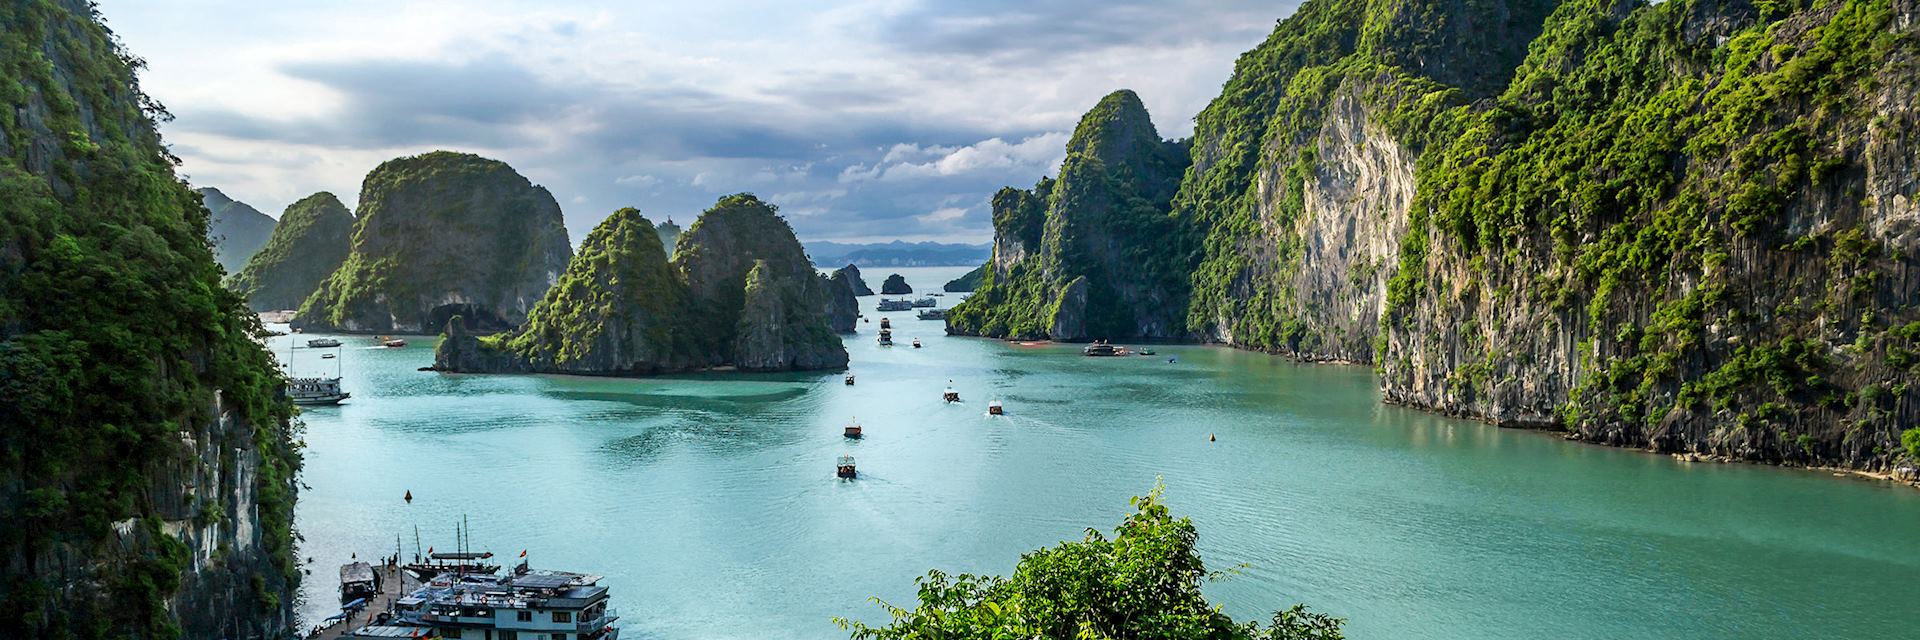 Visit Halong Bay on a trip to Vietnam | Audley Travel